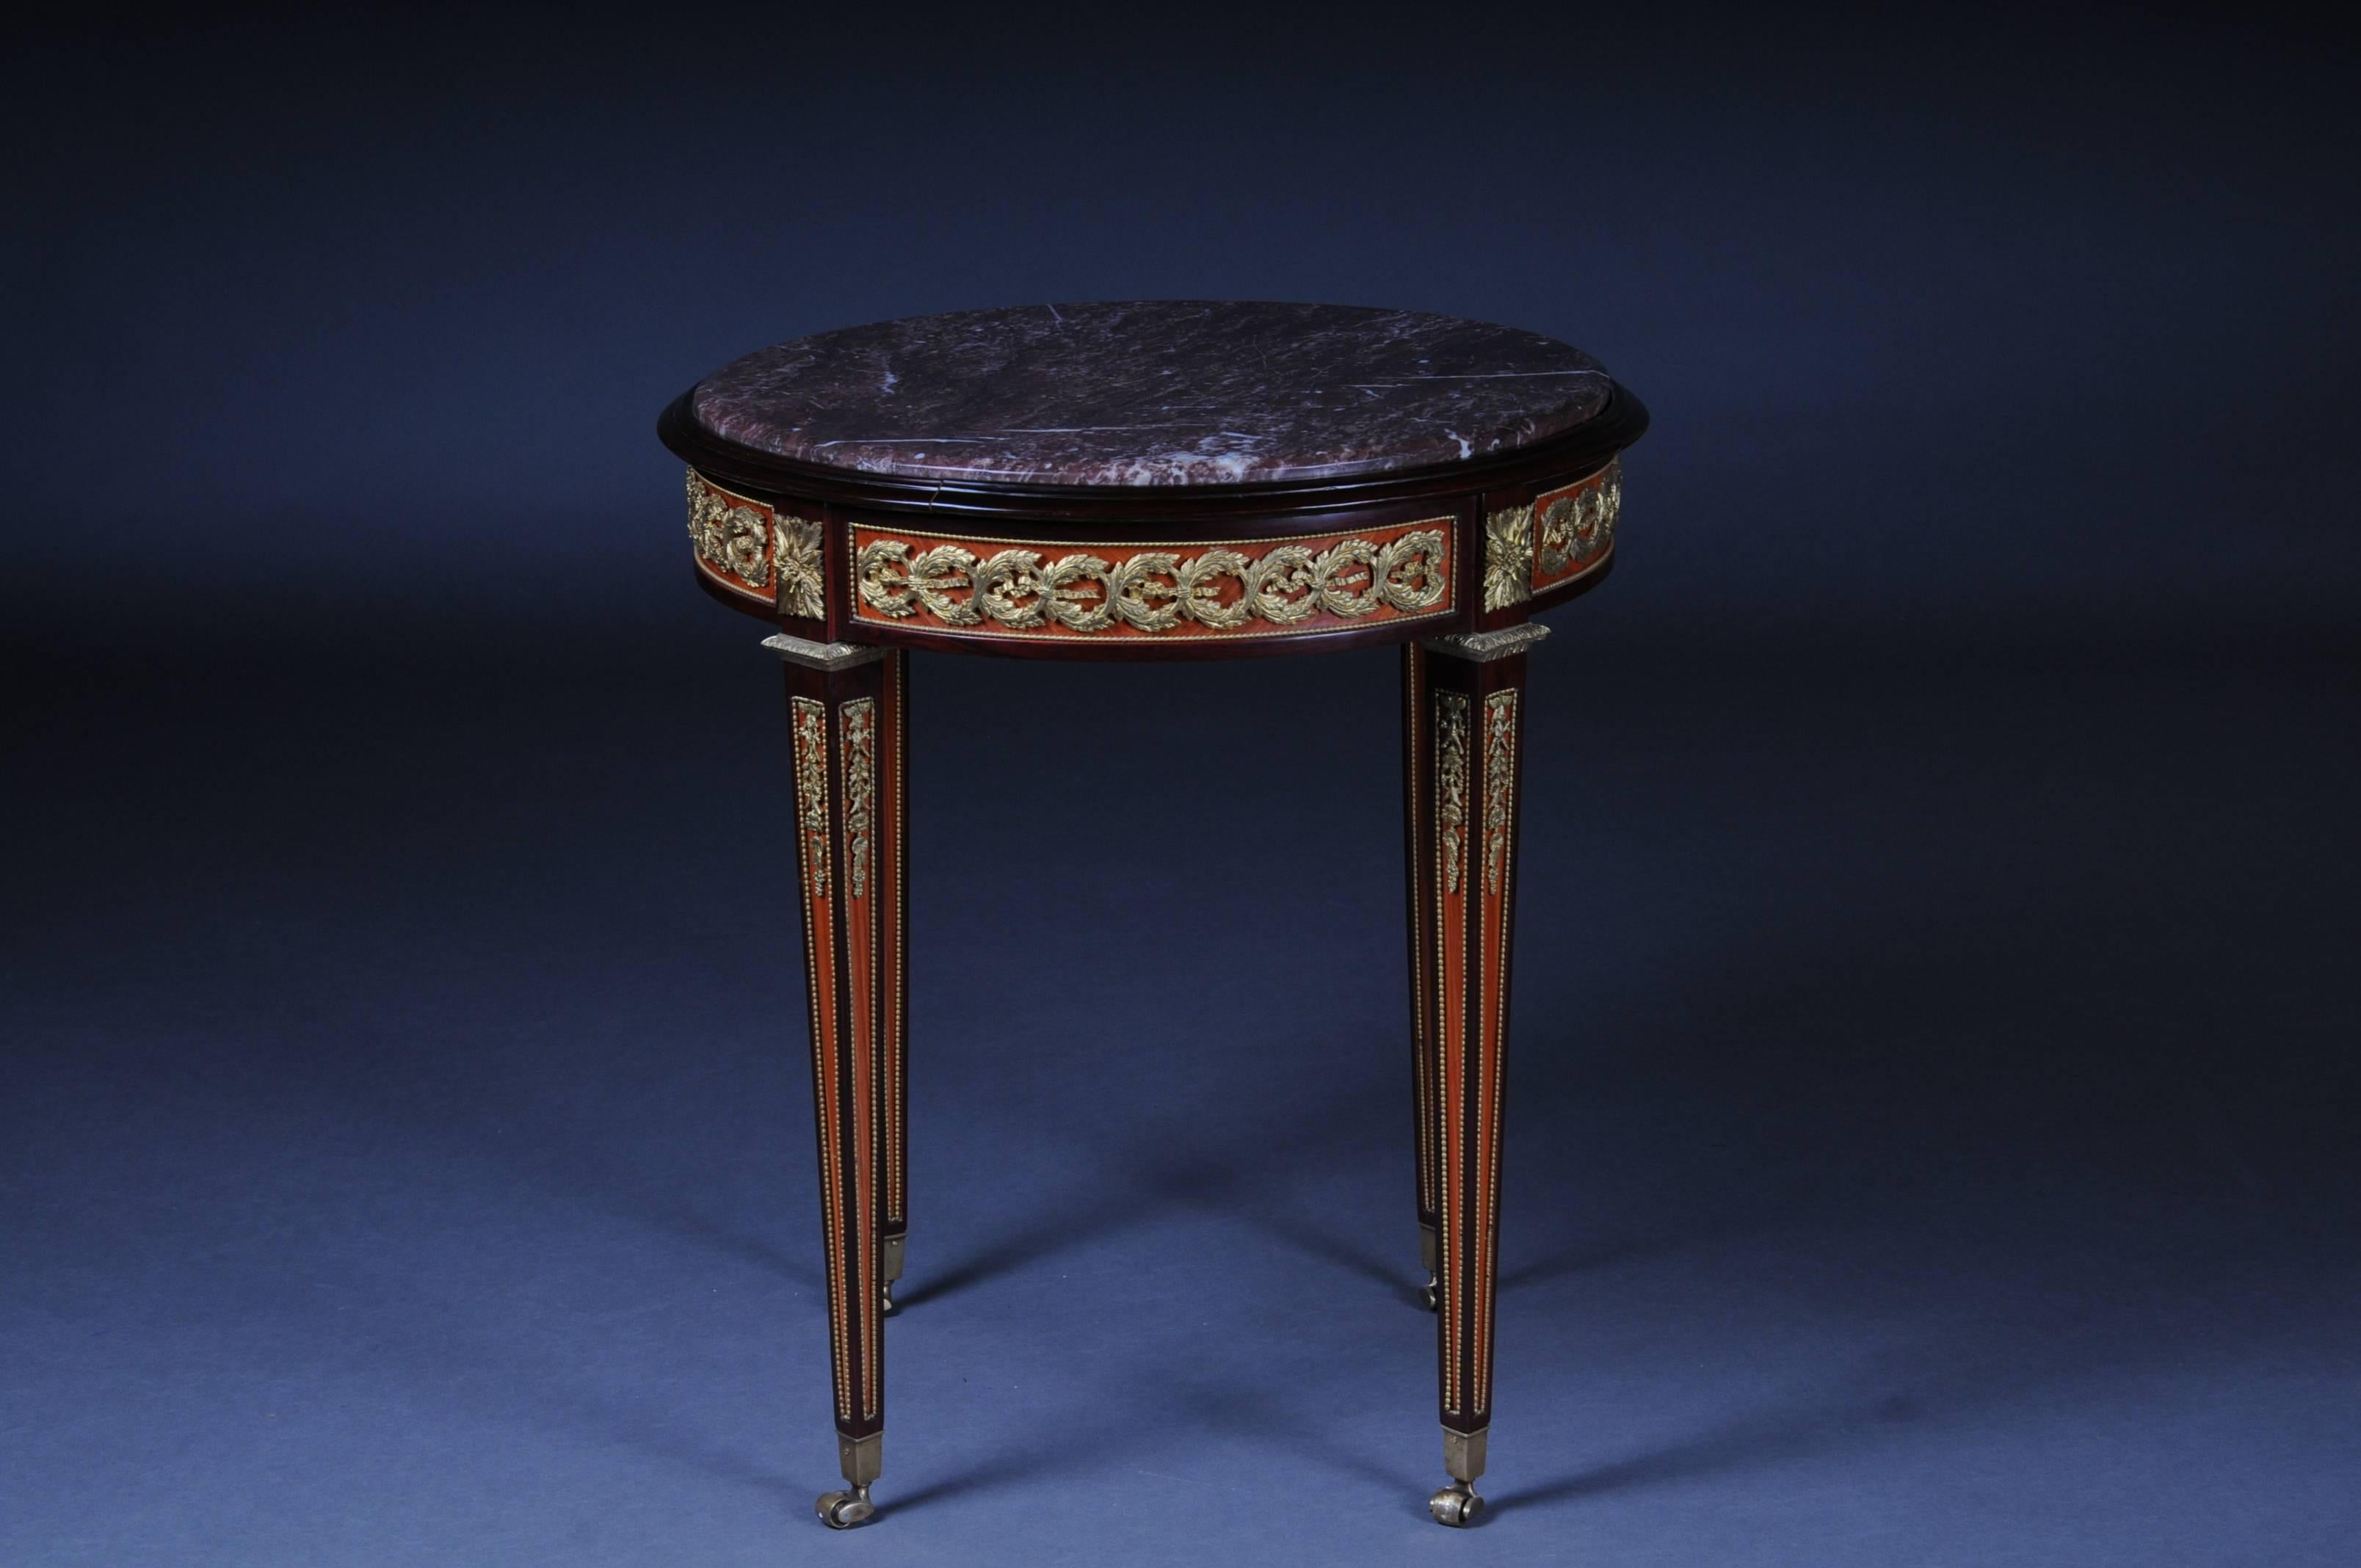 Classicist side table. Solid beechwood. Top in mottled marble edged in profile frame. Frame with finely engraved bronze, ending on brass-bound, tapering square legs in sabots with rollers. Solid wood and worked by hand. Beautiful patina, with